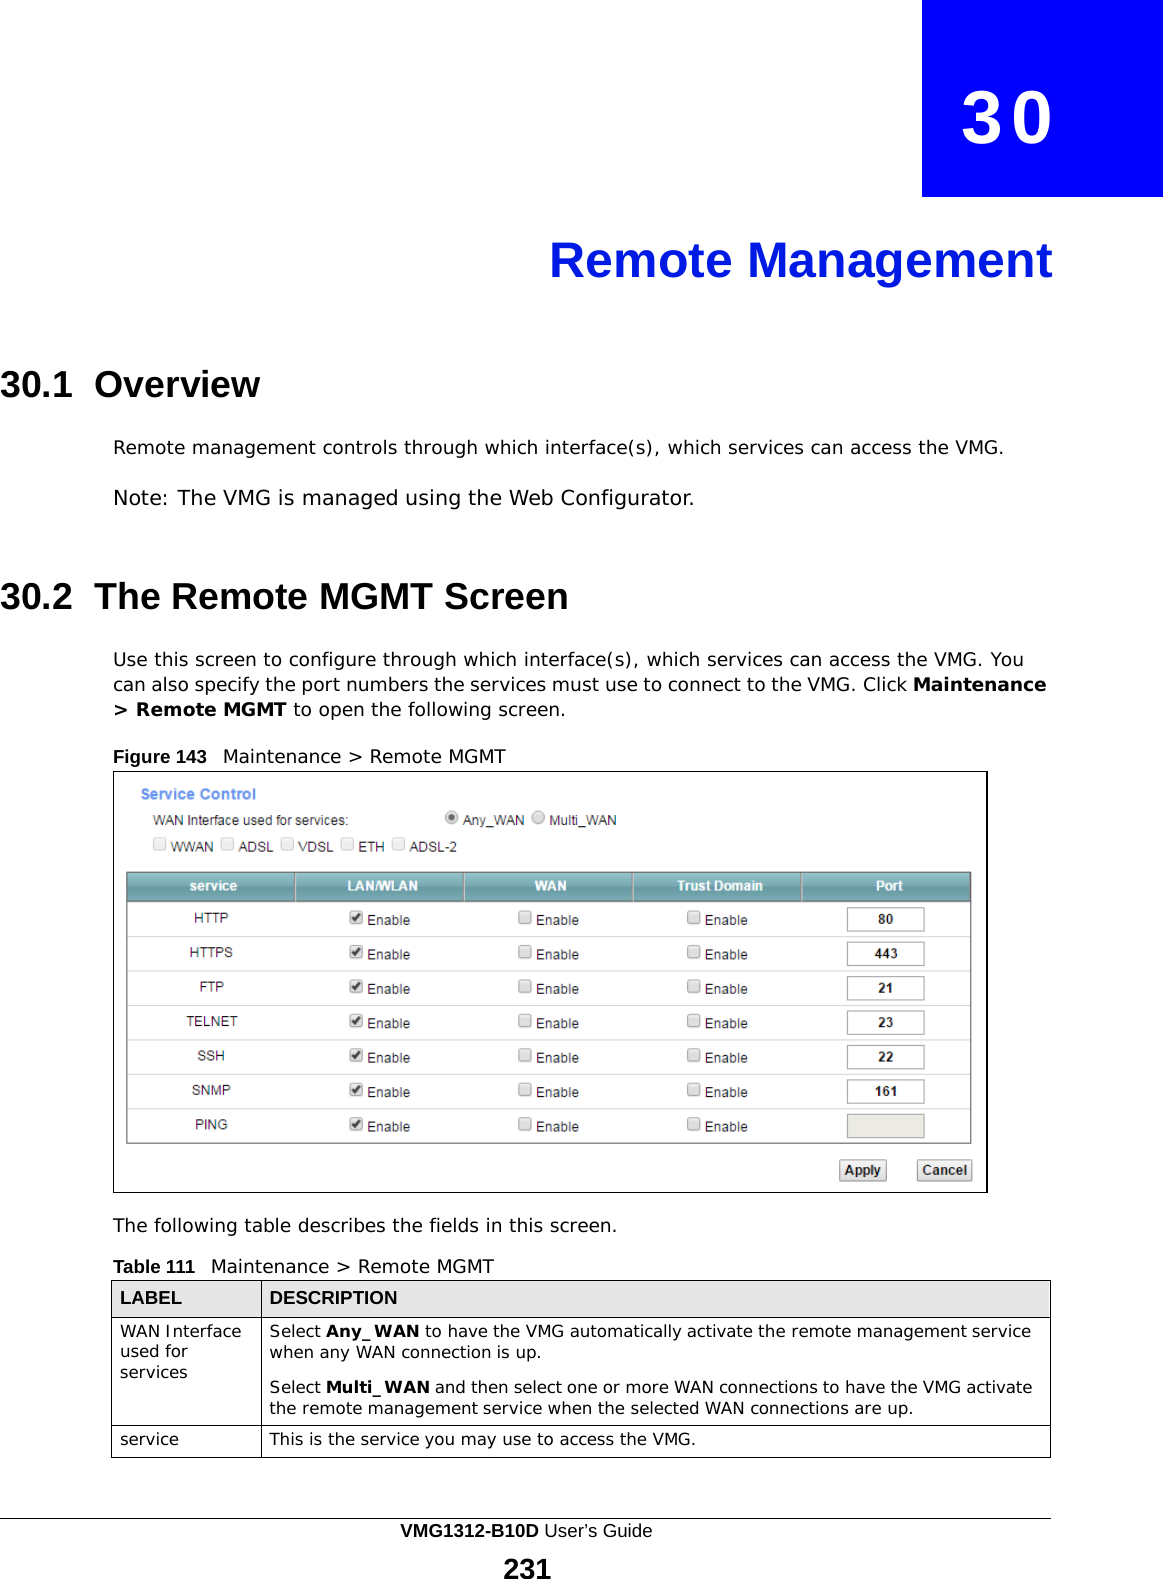    30     Remote Management     30.1 Overview  Remote management controls through which interface(s), which services can access the VMG.  Note: The VMG is managed using the Web Configurator.    30.2 The Remote MGMT Screen  Use this screen to configure through which interface(s), which services can access the VMG. You can also specify the port numbers the services must use to connect to the VMG. Click Maintenance &gt; Remote MGMT to open the following screen.  Figure 143   Maintenance &gt; Remote MGMT                      The following table describes the fields in this screen.  Table 111   Maintenance &gt; Remote MGMT  LABEL DESCRIPTION WAN Interface used for services Select Any_WAN to have the VMG automatically activate the remote management service when any WAN connection is up.  Select Multi_WAN and then select one or more WAN connections to have the VMG activate the remote management service when the selected WAN connections are up. service This is the service you may use to access the VMG. VMG1312-B10D User’s Guide 231  